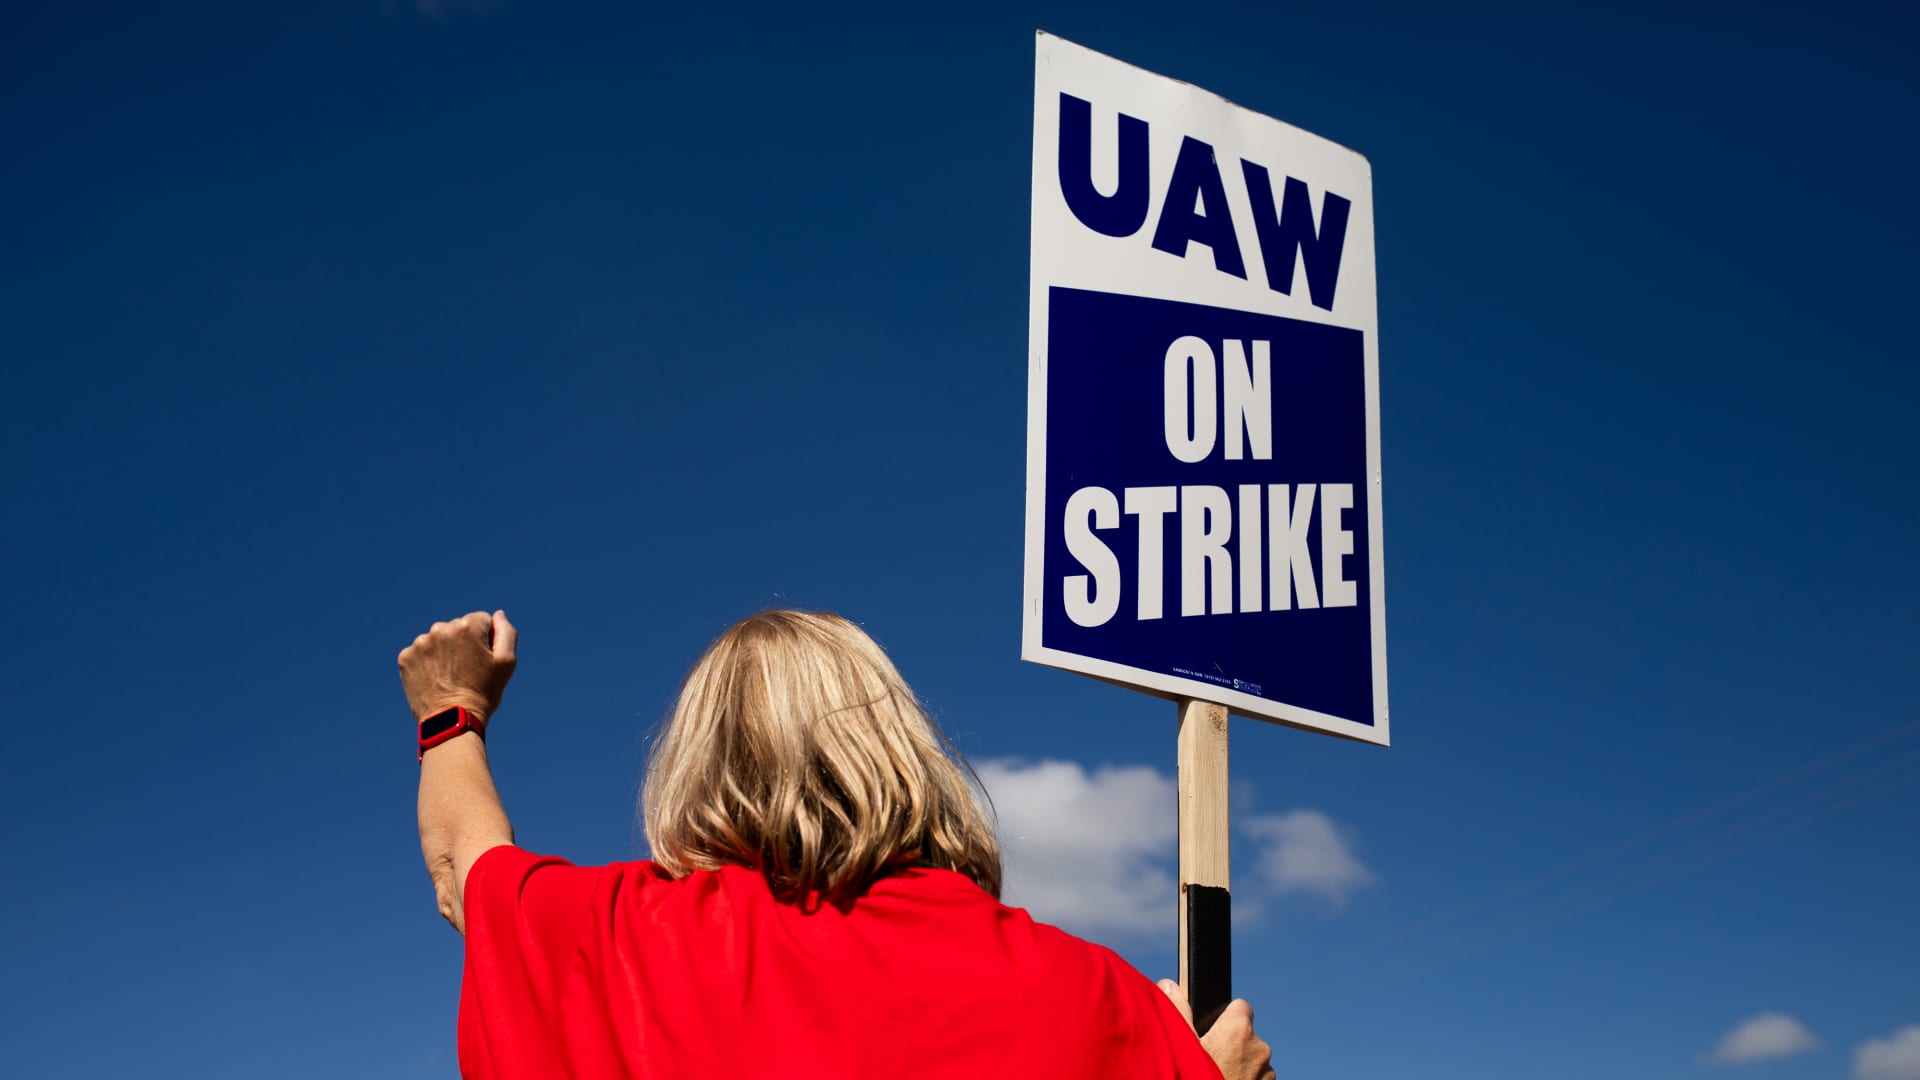 White House no longer sending top officials to Detroit for UAW strike talks this week